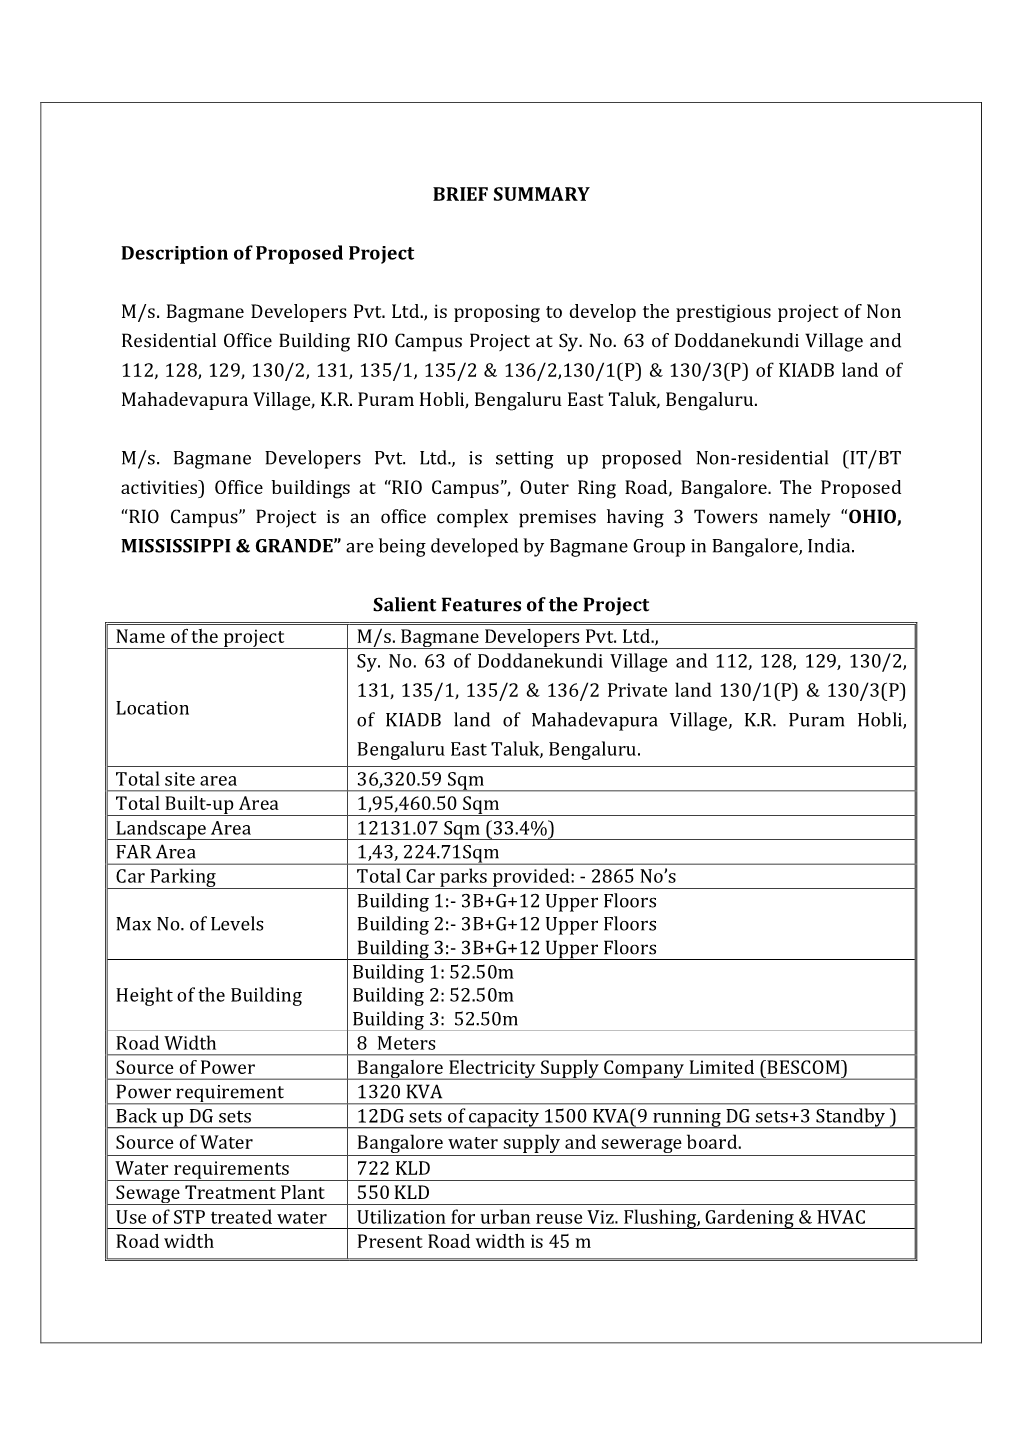 BRIEF SUMMARY Description of Proposed Project M/S. Bagmane Developers Pvt. Ltd., Is Proposing to Develop the Prestigious Project